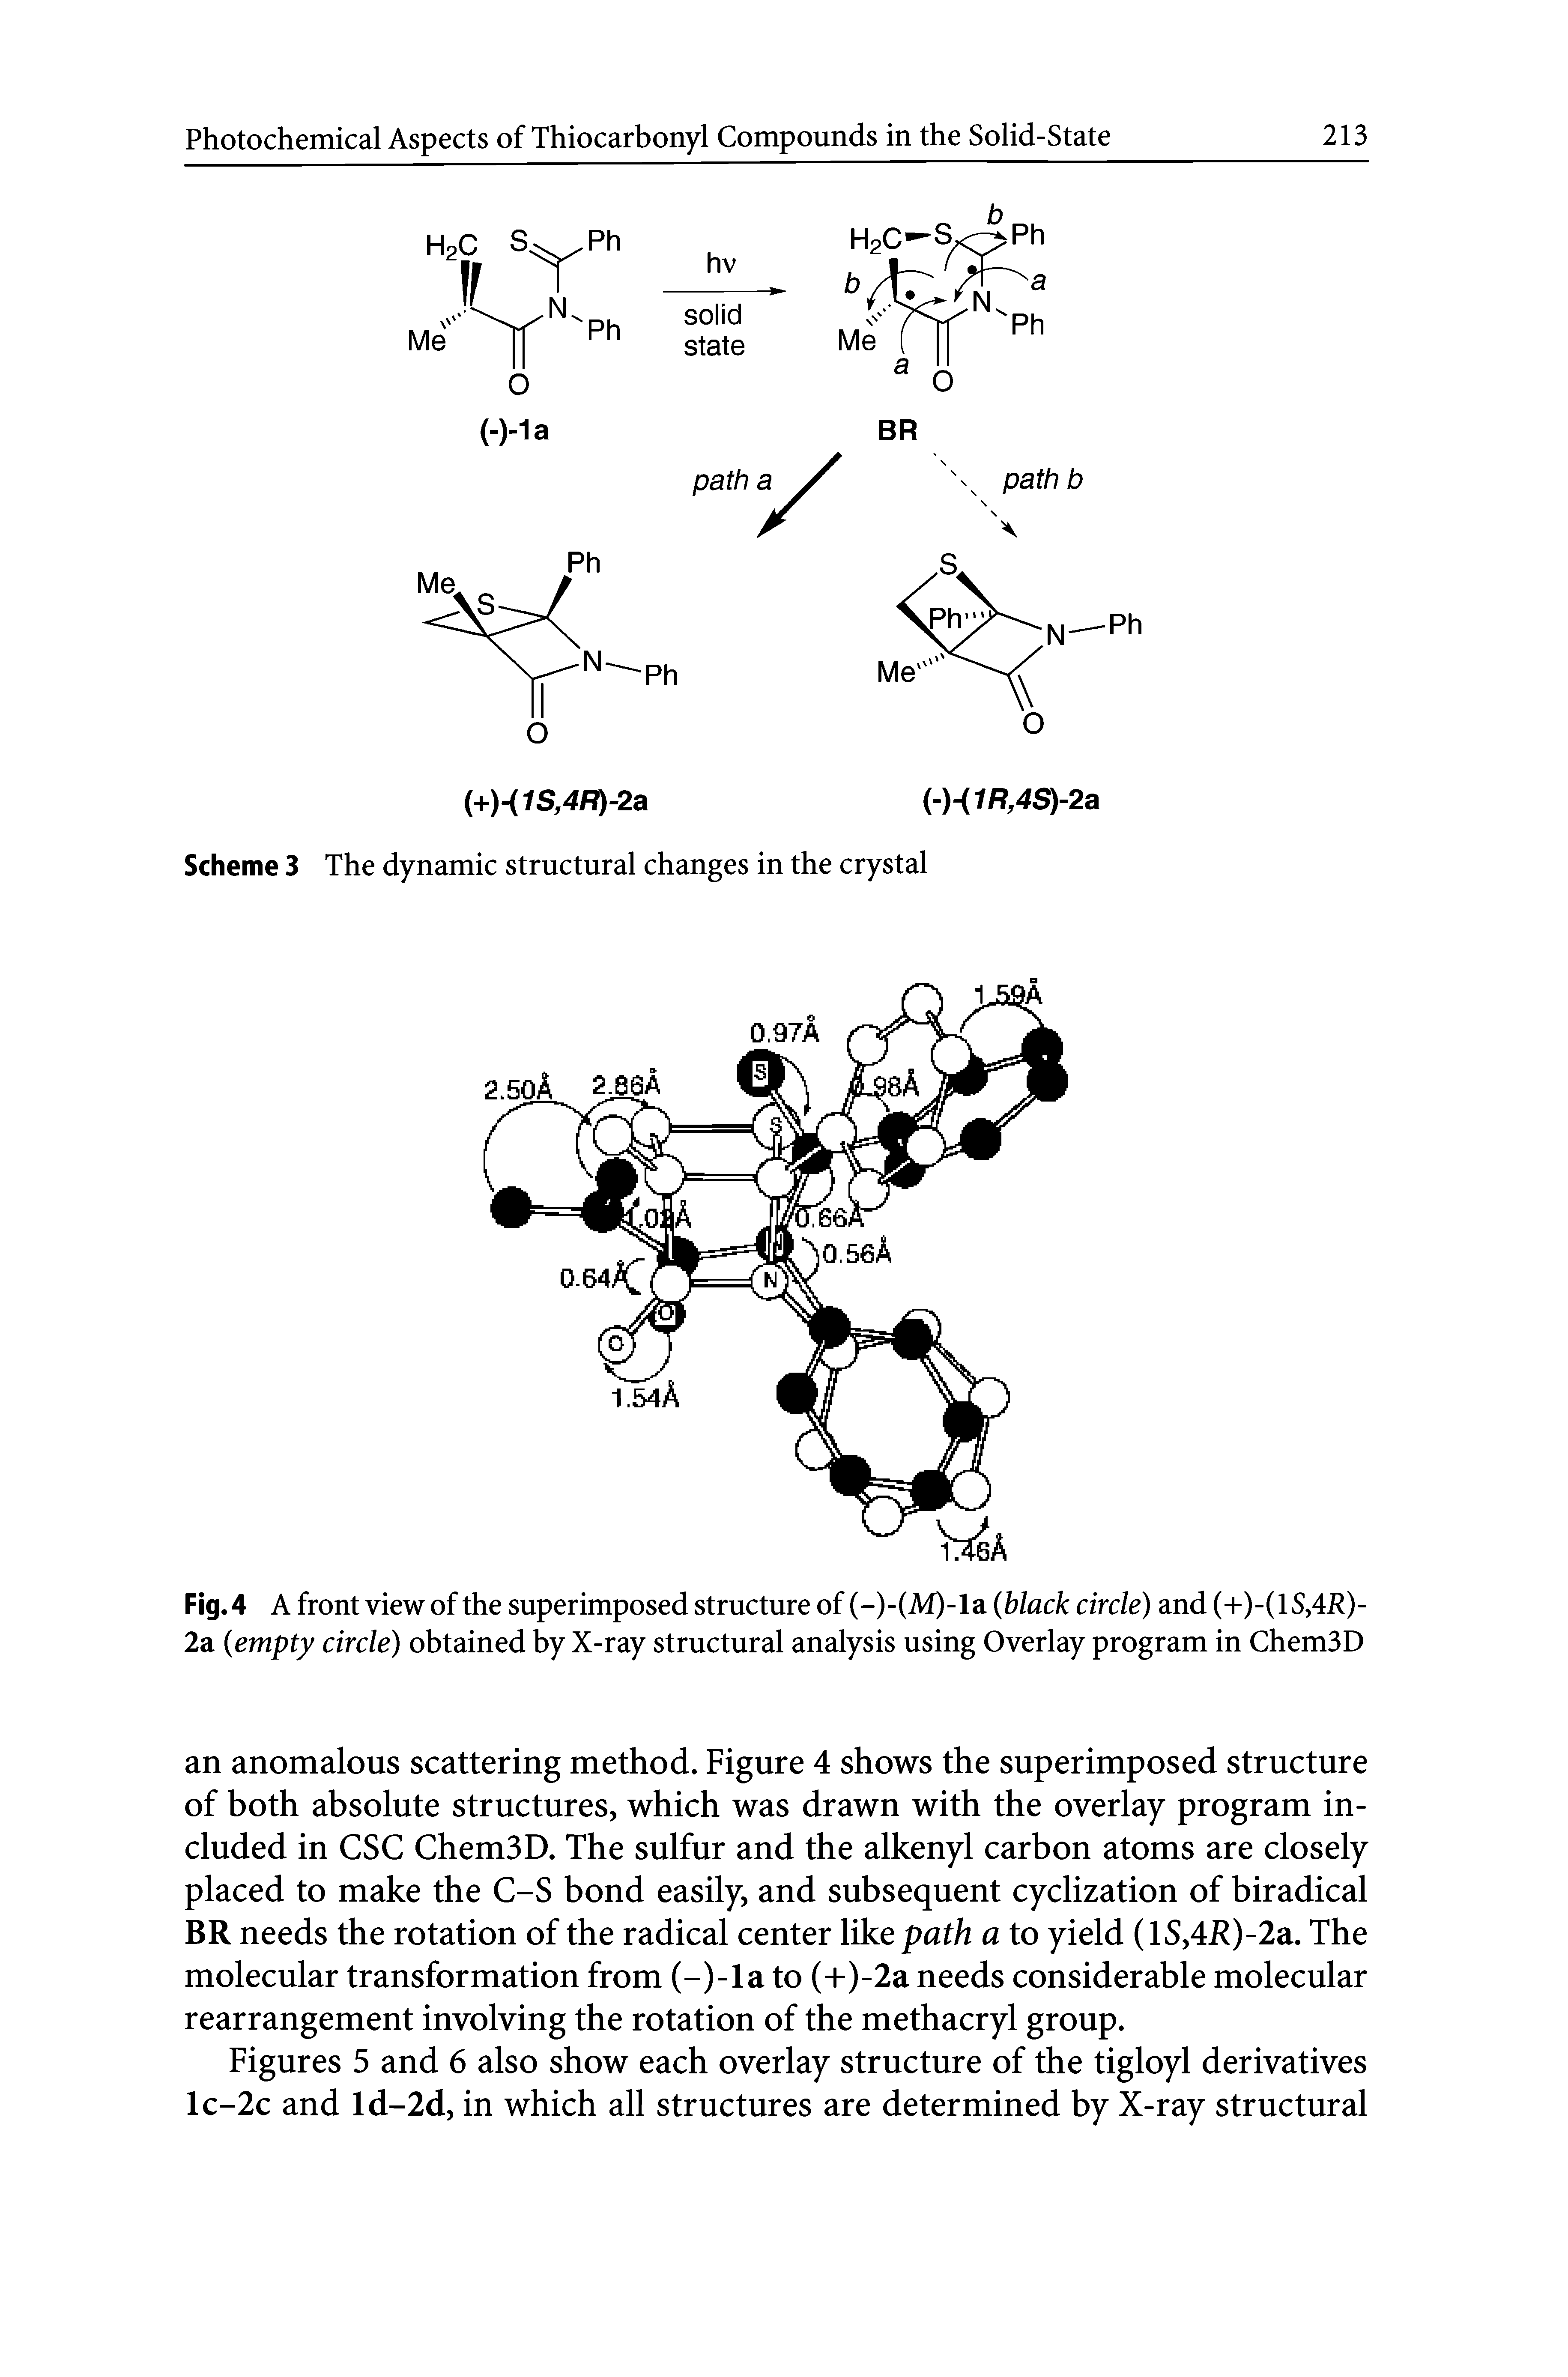 Figures 5 and 6 also show each overlay structure of the tigloyl derivatives lc-2c and ld-2d, in which all structures are determined by X-ray structural...